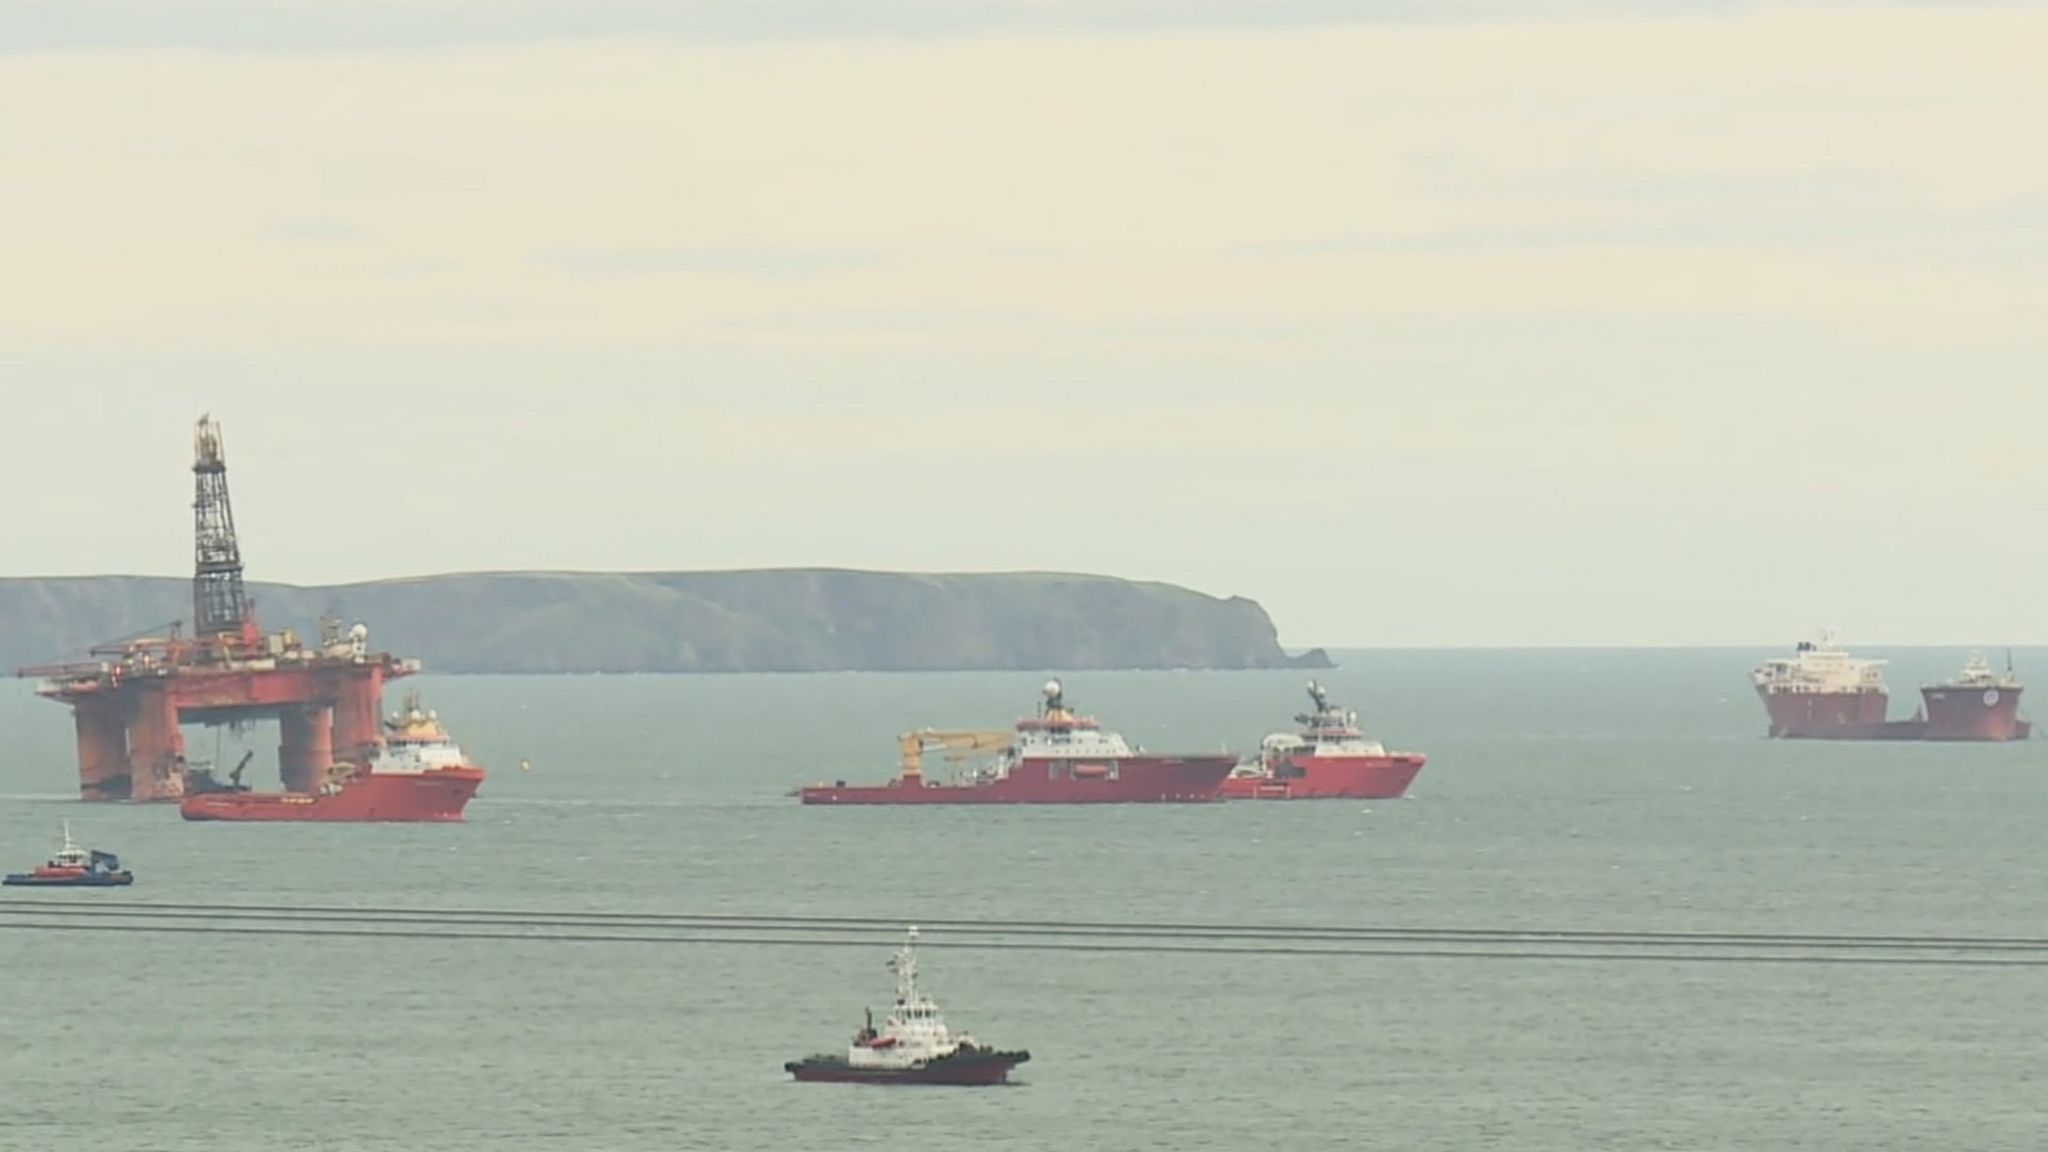 OHT Hawk, far right, and rig Transocean Winner and support vessels